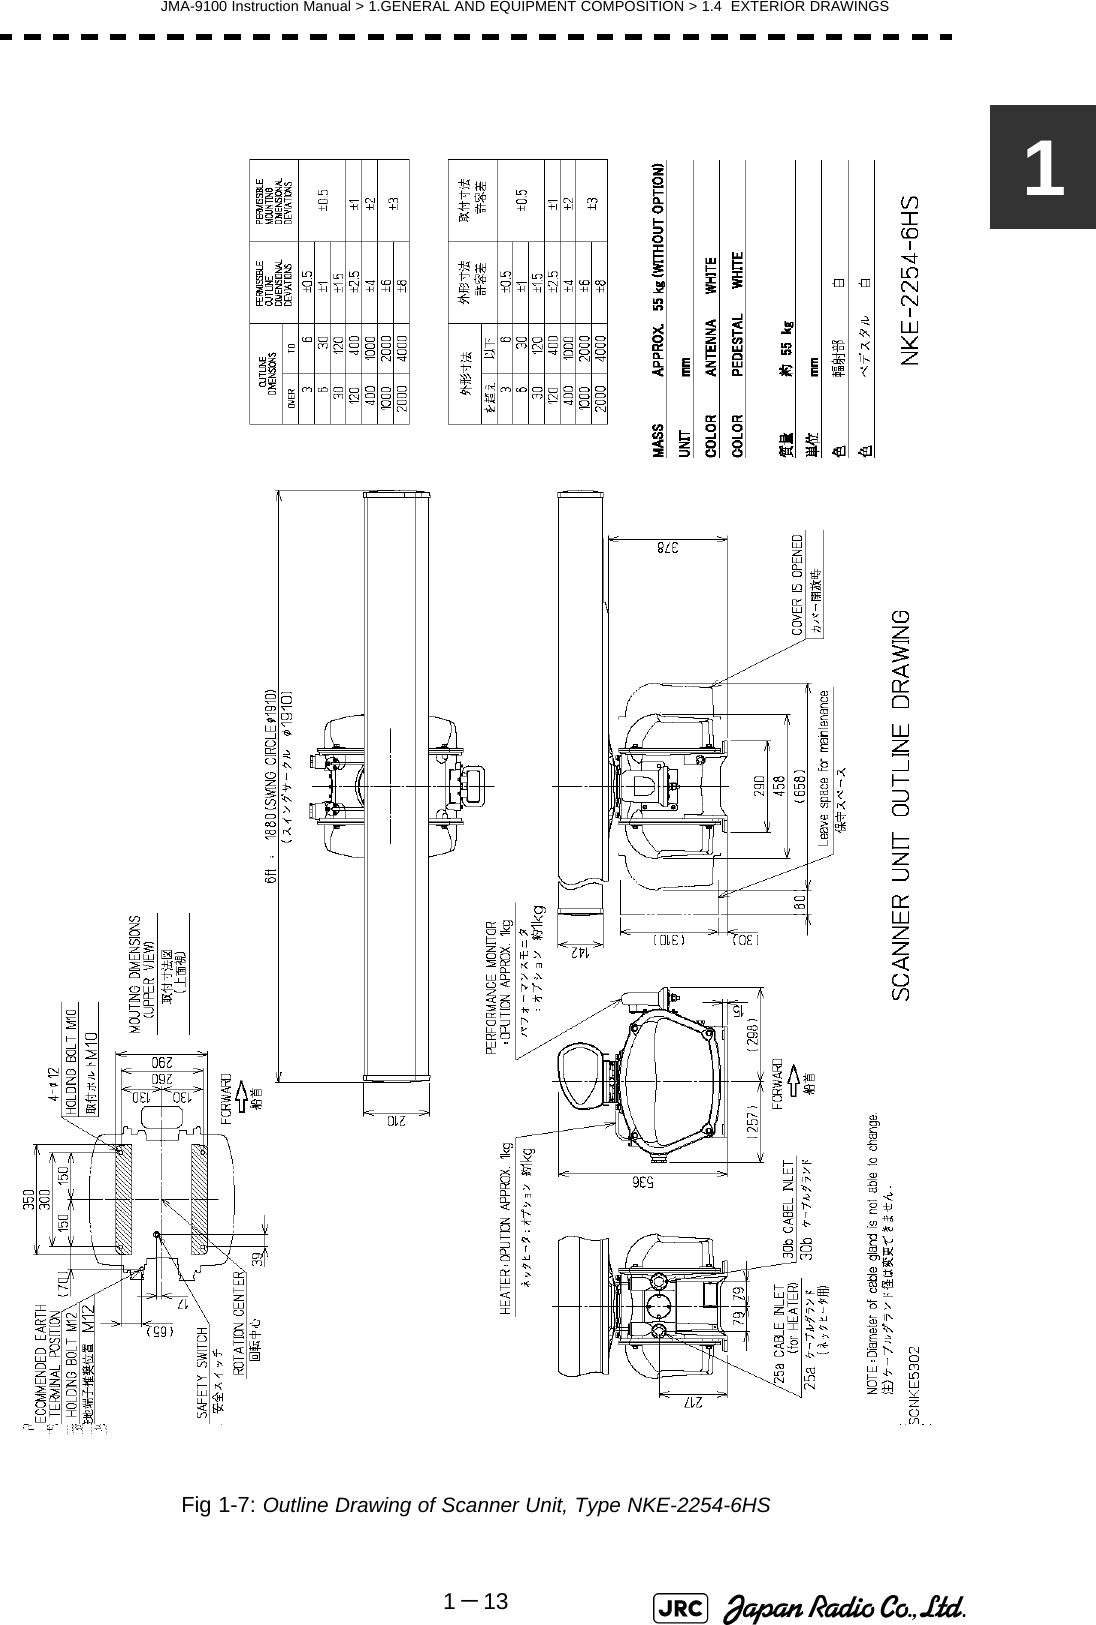 JMA-9100 Instruction Manual &gt; 1.GENERAL AND EQUIPMENT COMPOSITION &gt; 1.4  EXTERIOR DRAWINGS1－131Fig 1-7: Outline Drawing of Scanner Unit, Type NKE-2254-6HS